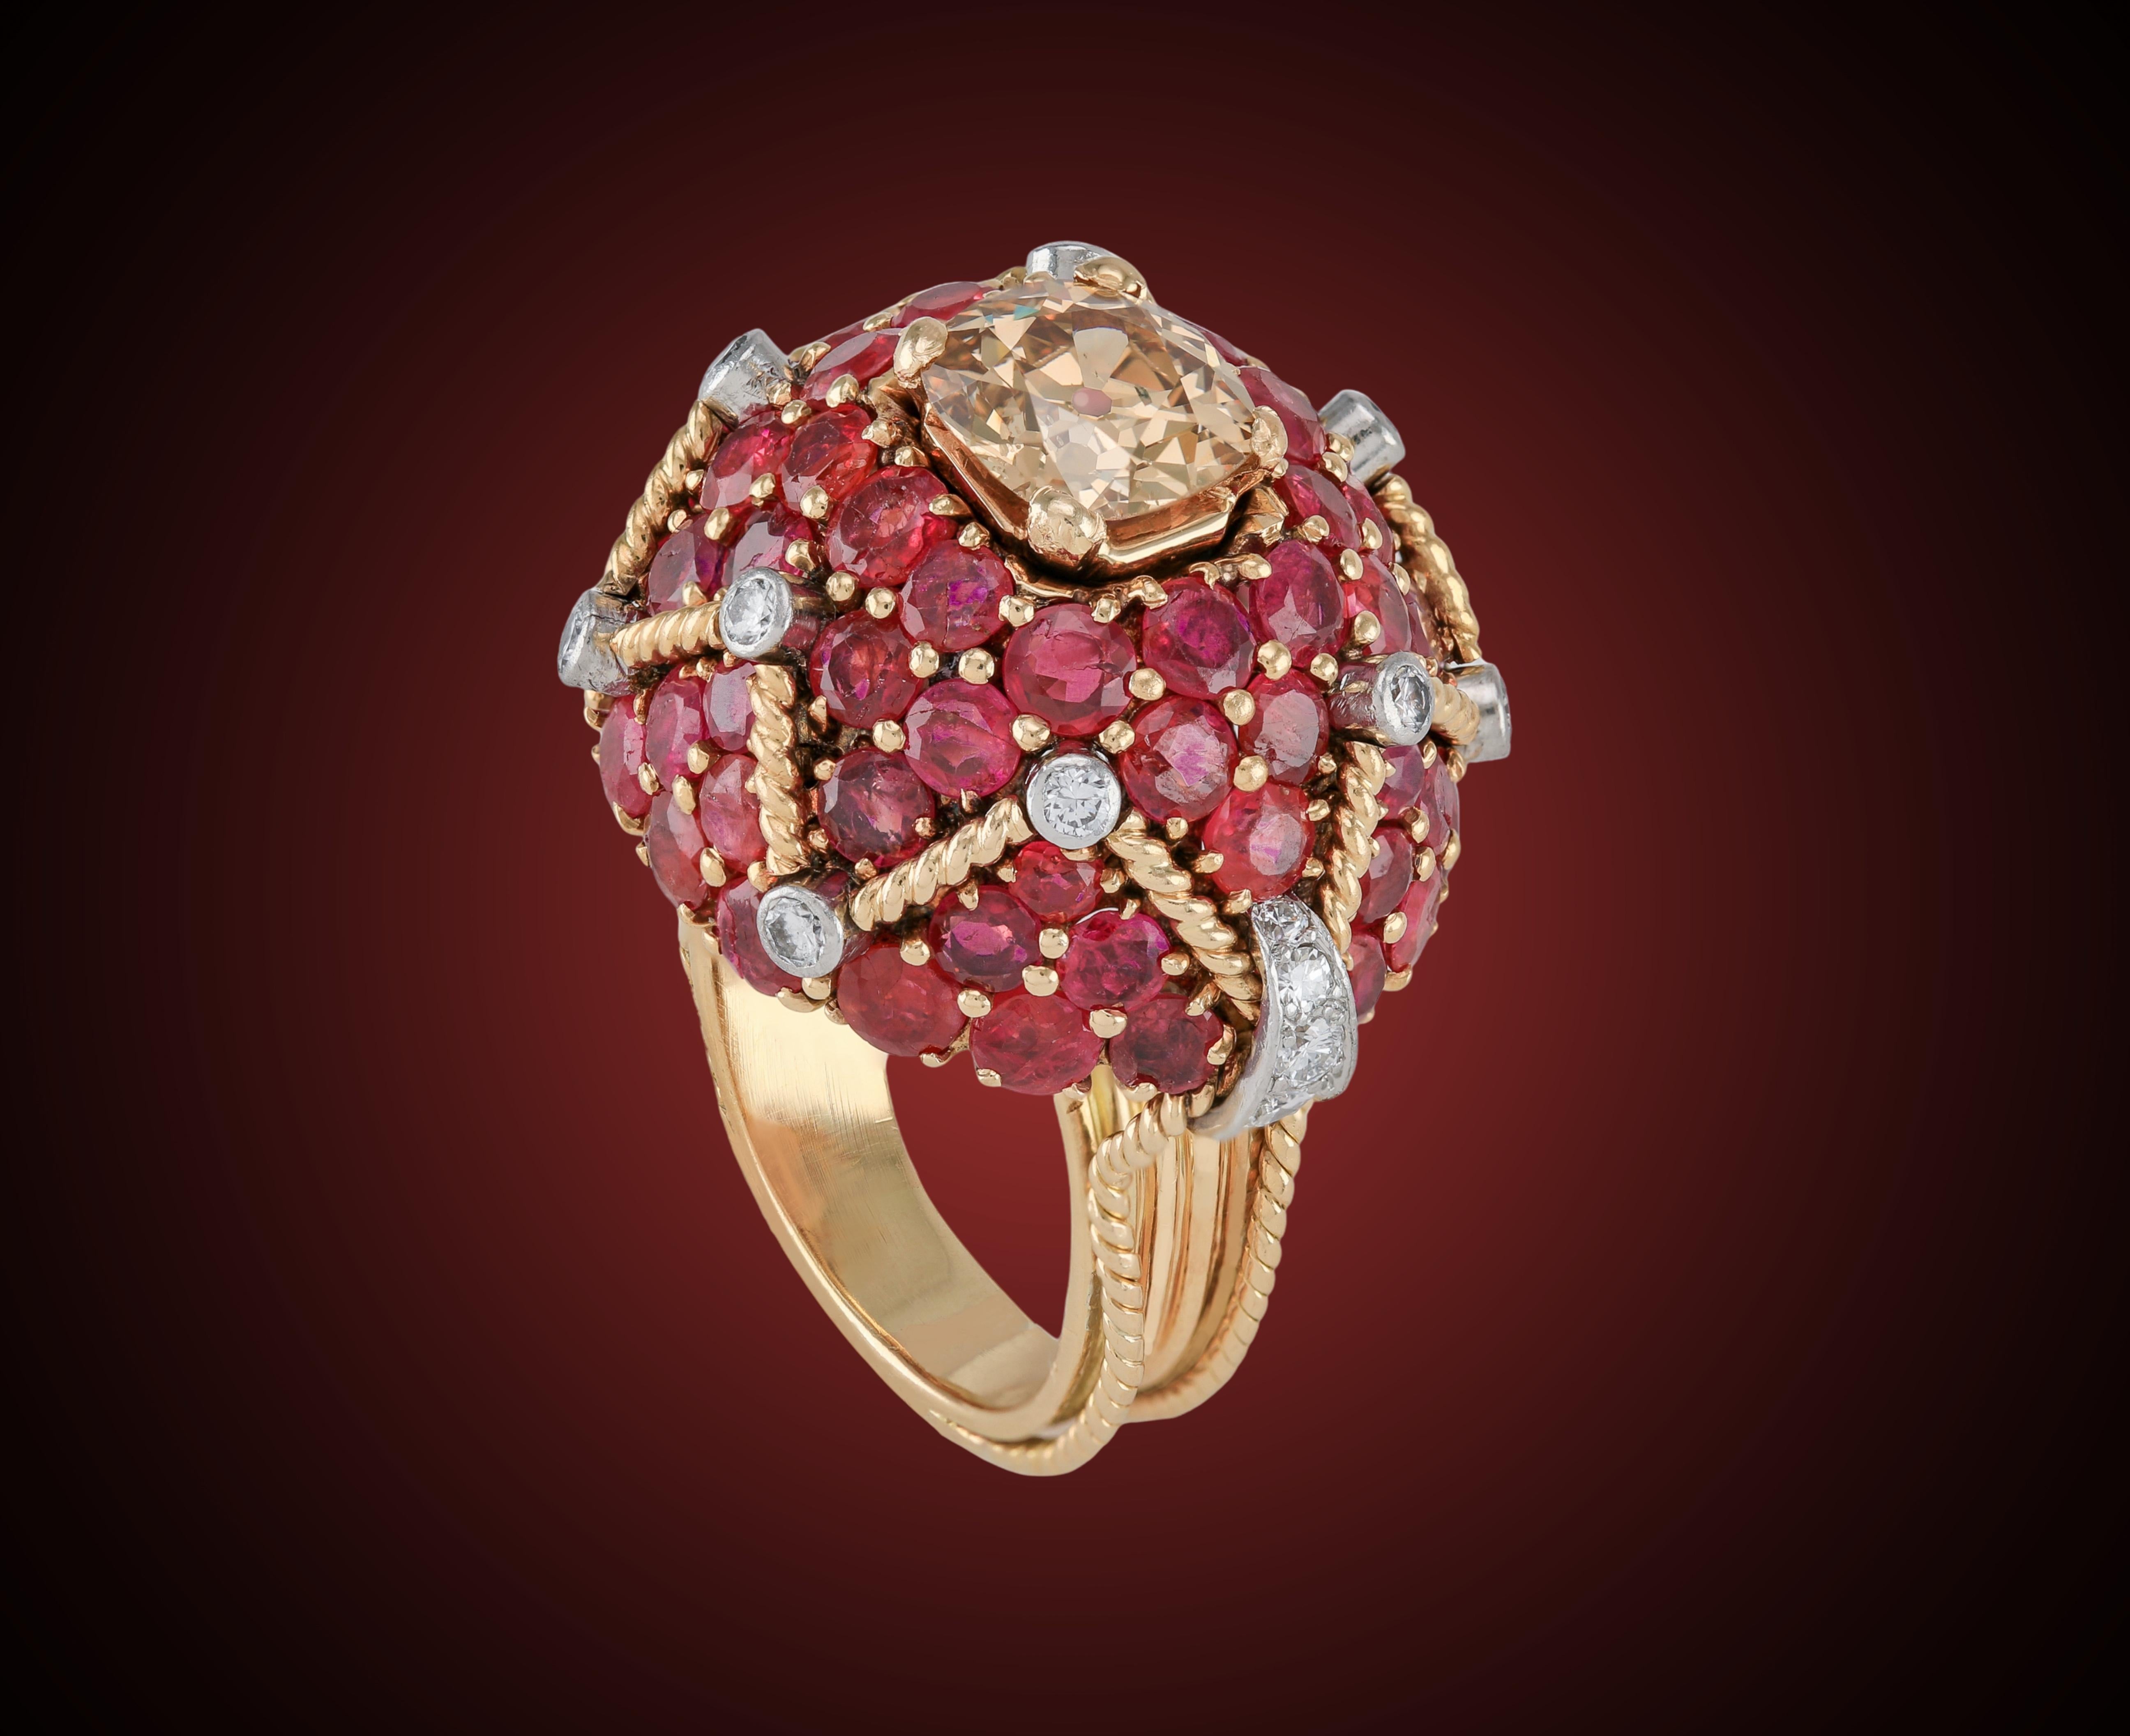 Antique 14k, Center 1.91 ct Fancy-Yellow Brown Diamond Burmese Ruby Bombé Ring
A phenomenal antique creation, this fantastic ring is definitely one of a kind. Whether it will be your engagement ring or your cocktail ring, it will sure make a